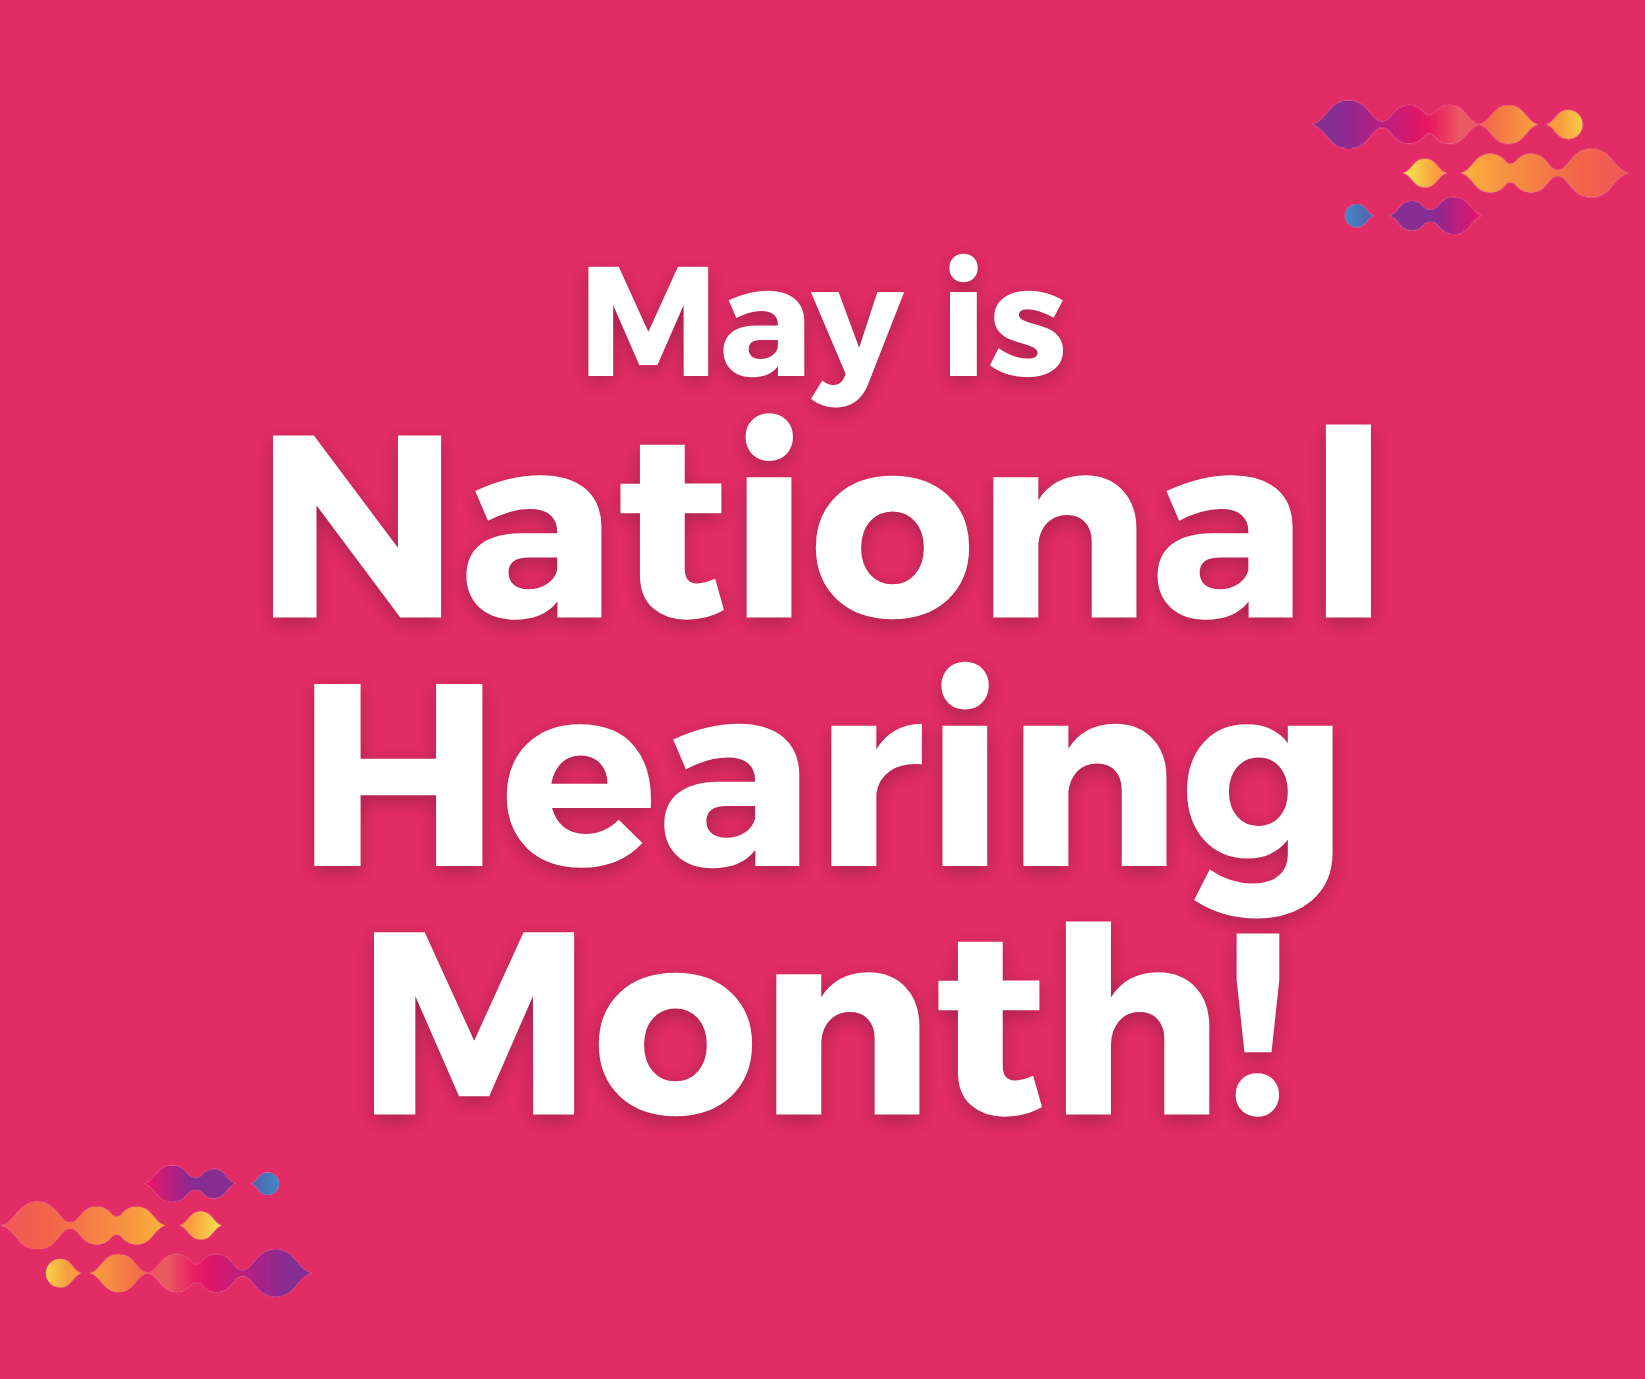 May is National Hearing Month